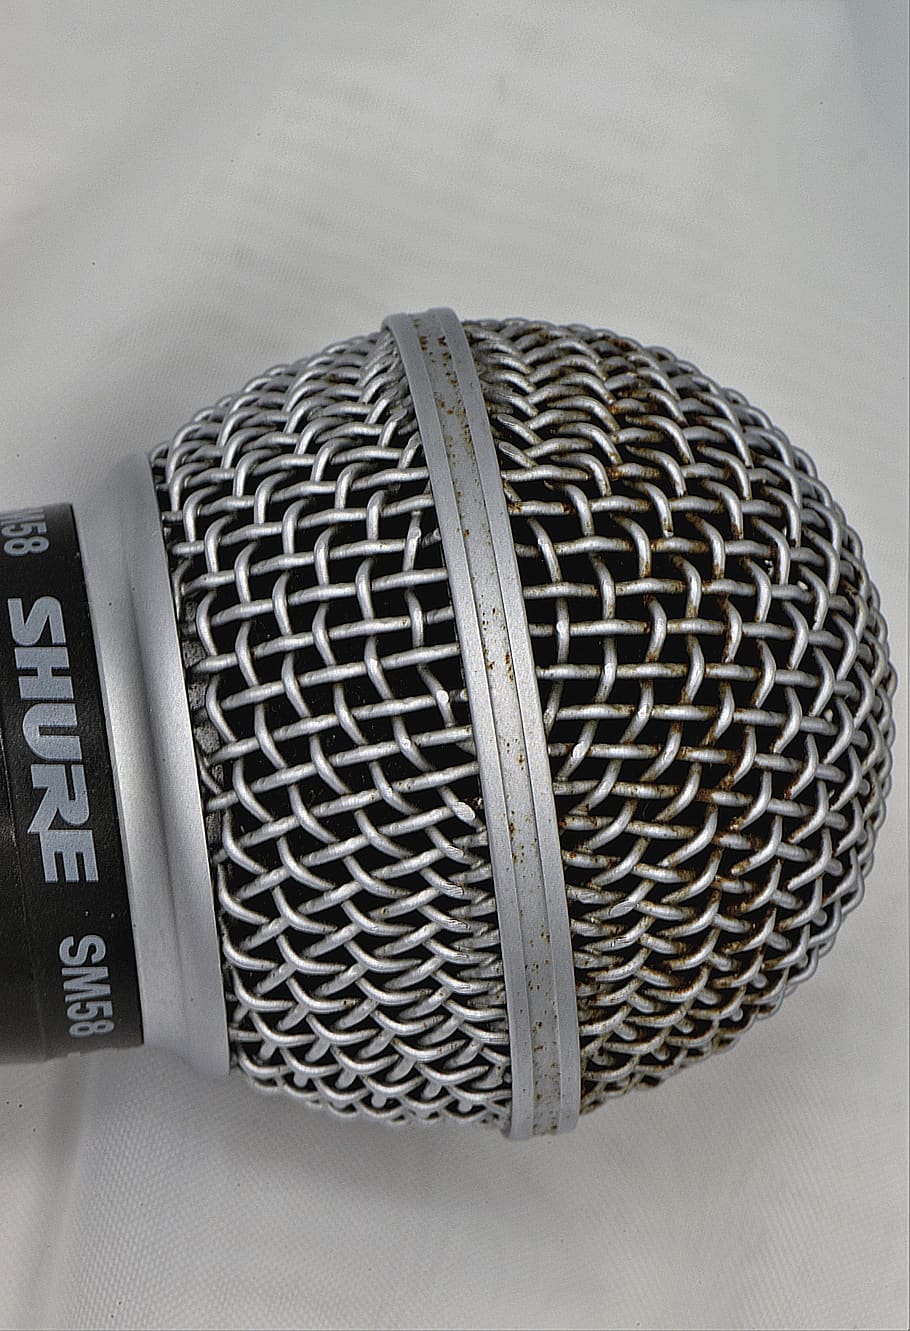 microphone, close up, used, microphone basket, old, pattern, indoors, close-up, still life, single object